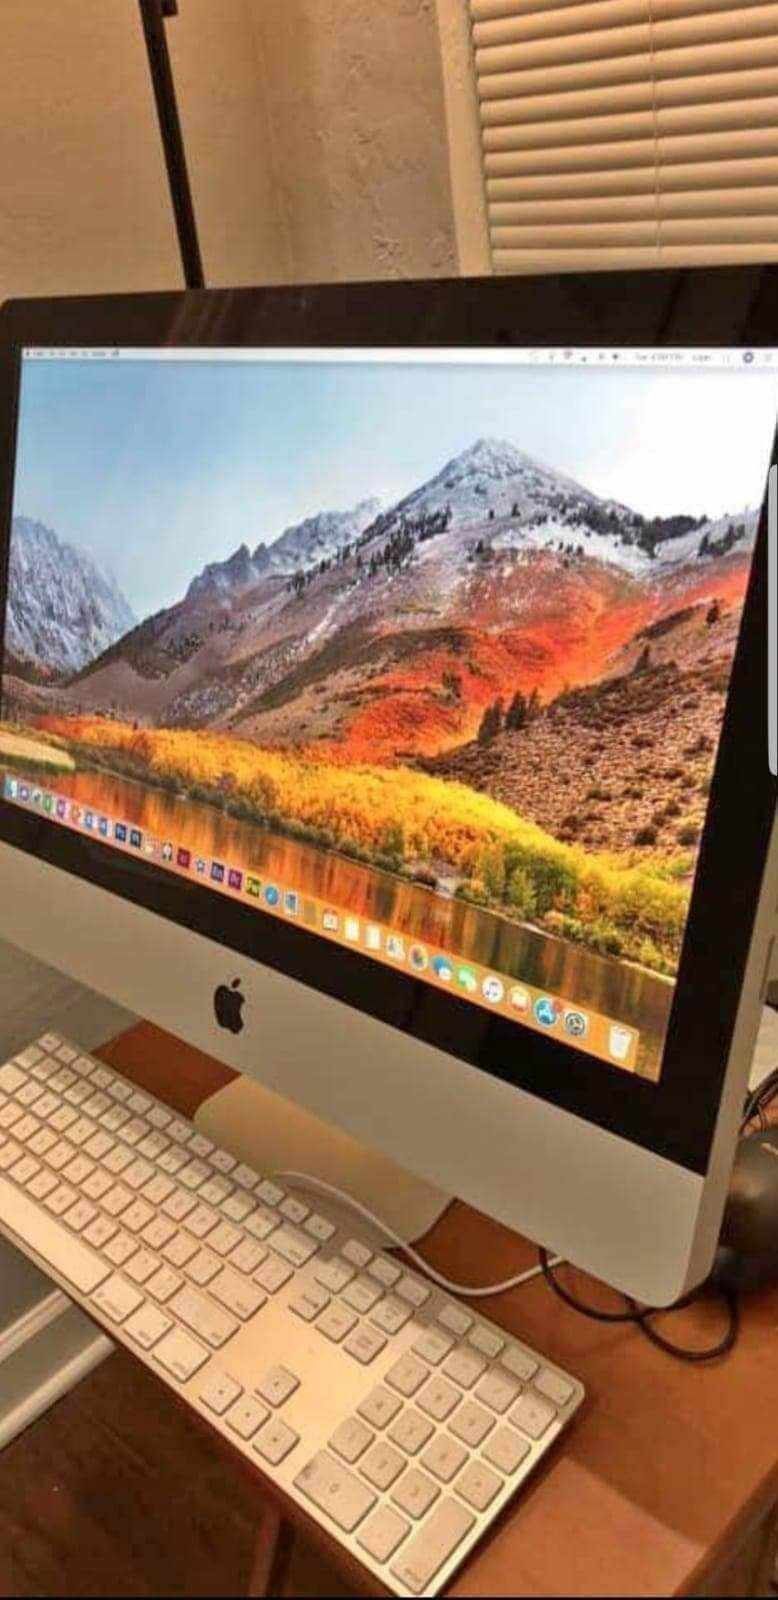 Excellent 27 inch Apple Imac Desktop Computer With Intel Core 2 Duo Processor With Programs 